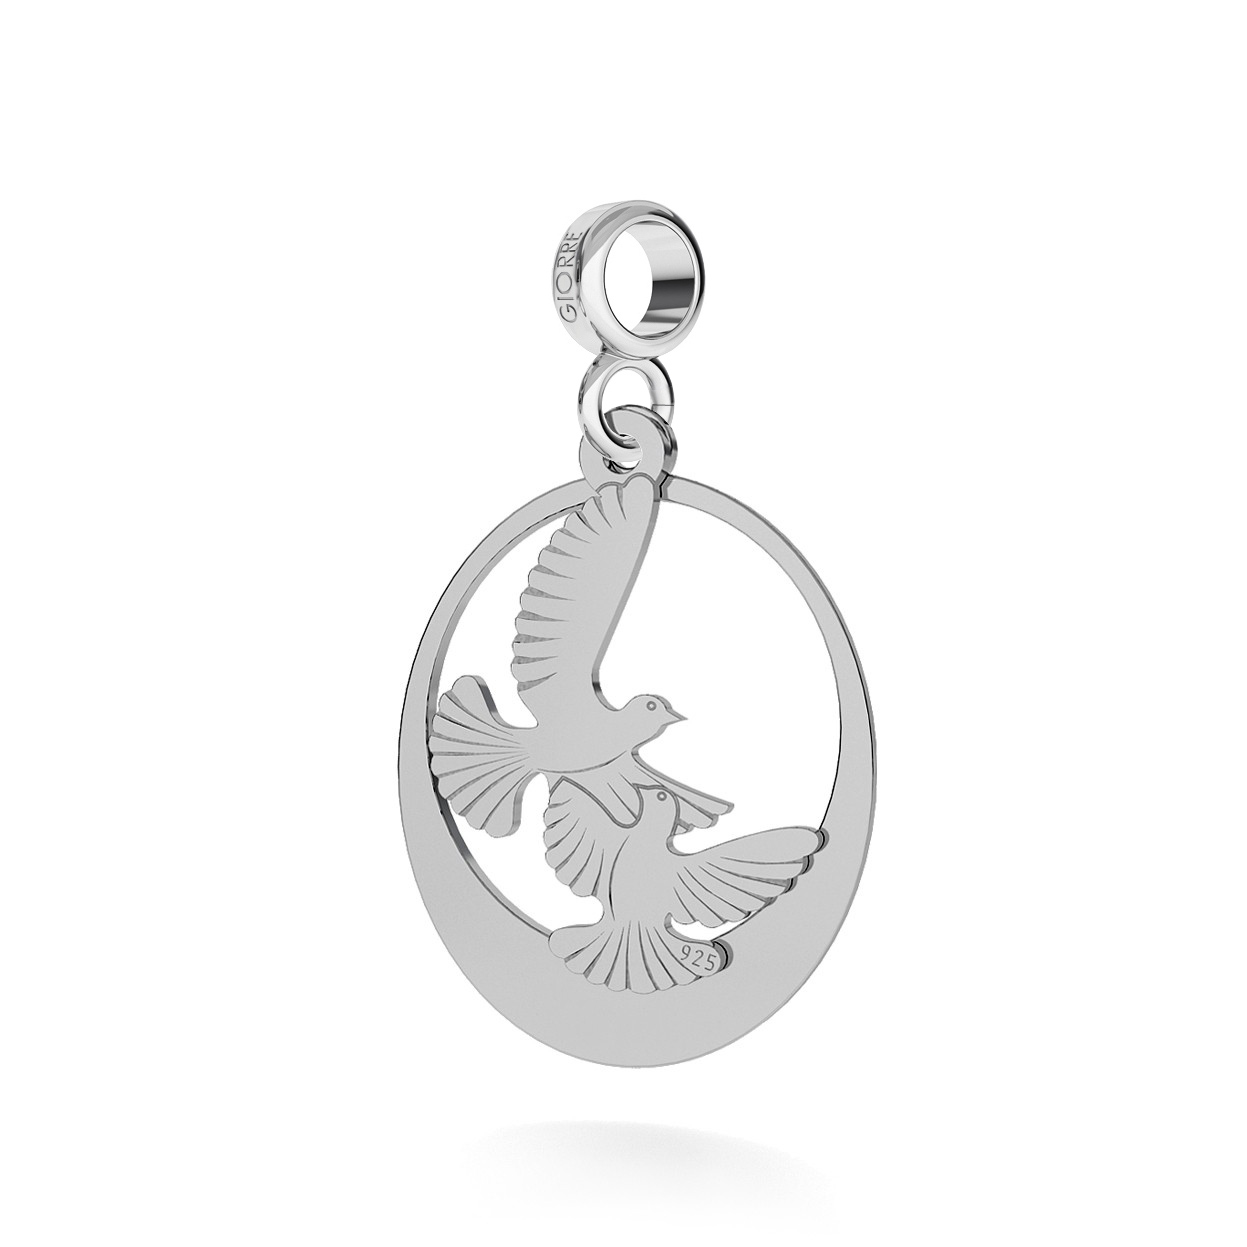 CHARM 123, TURTLEDOVE WITH ENGRAVE, STERLING SILVER (925) RHODIUM OR GOLD PLATED